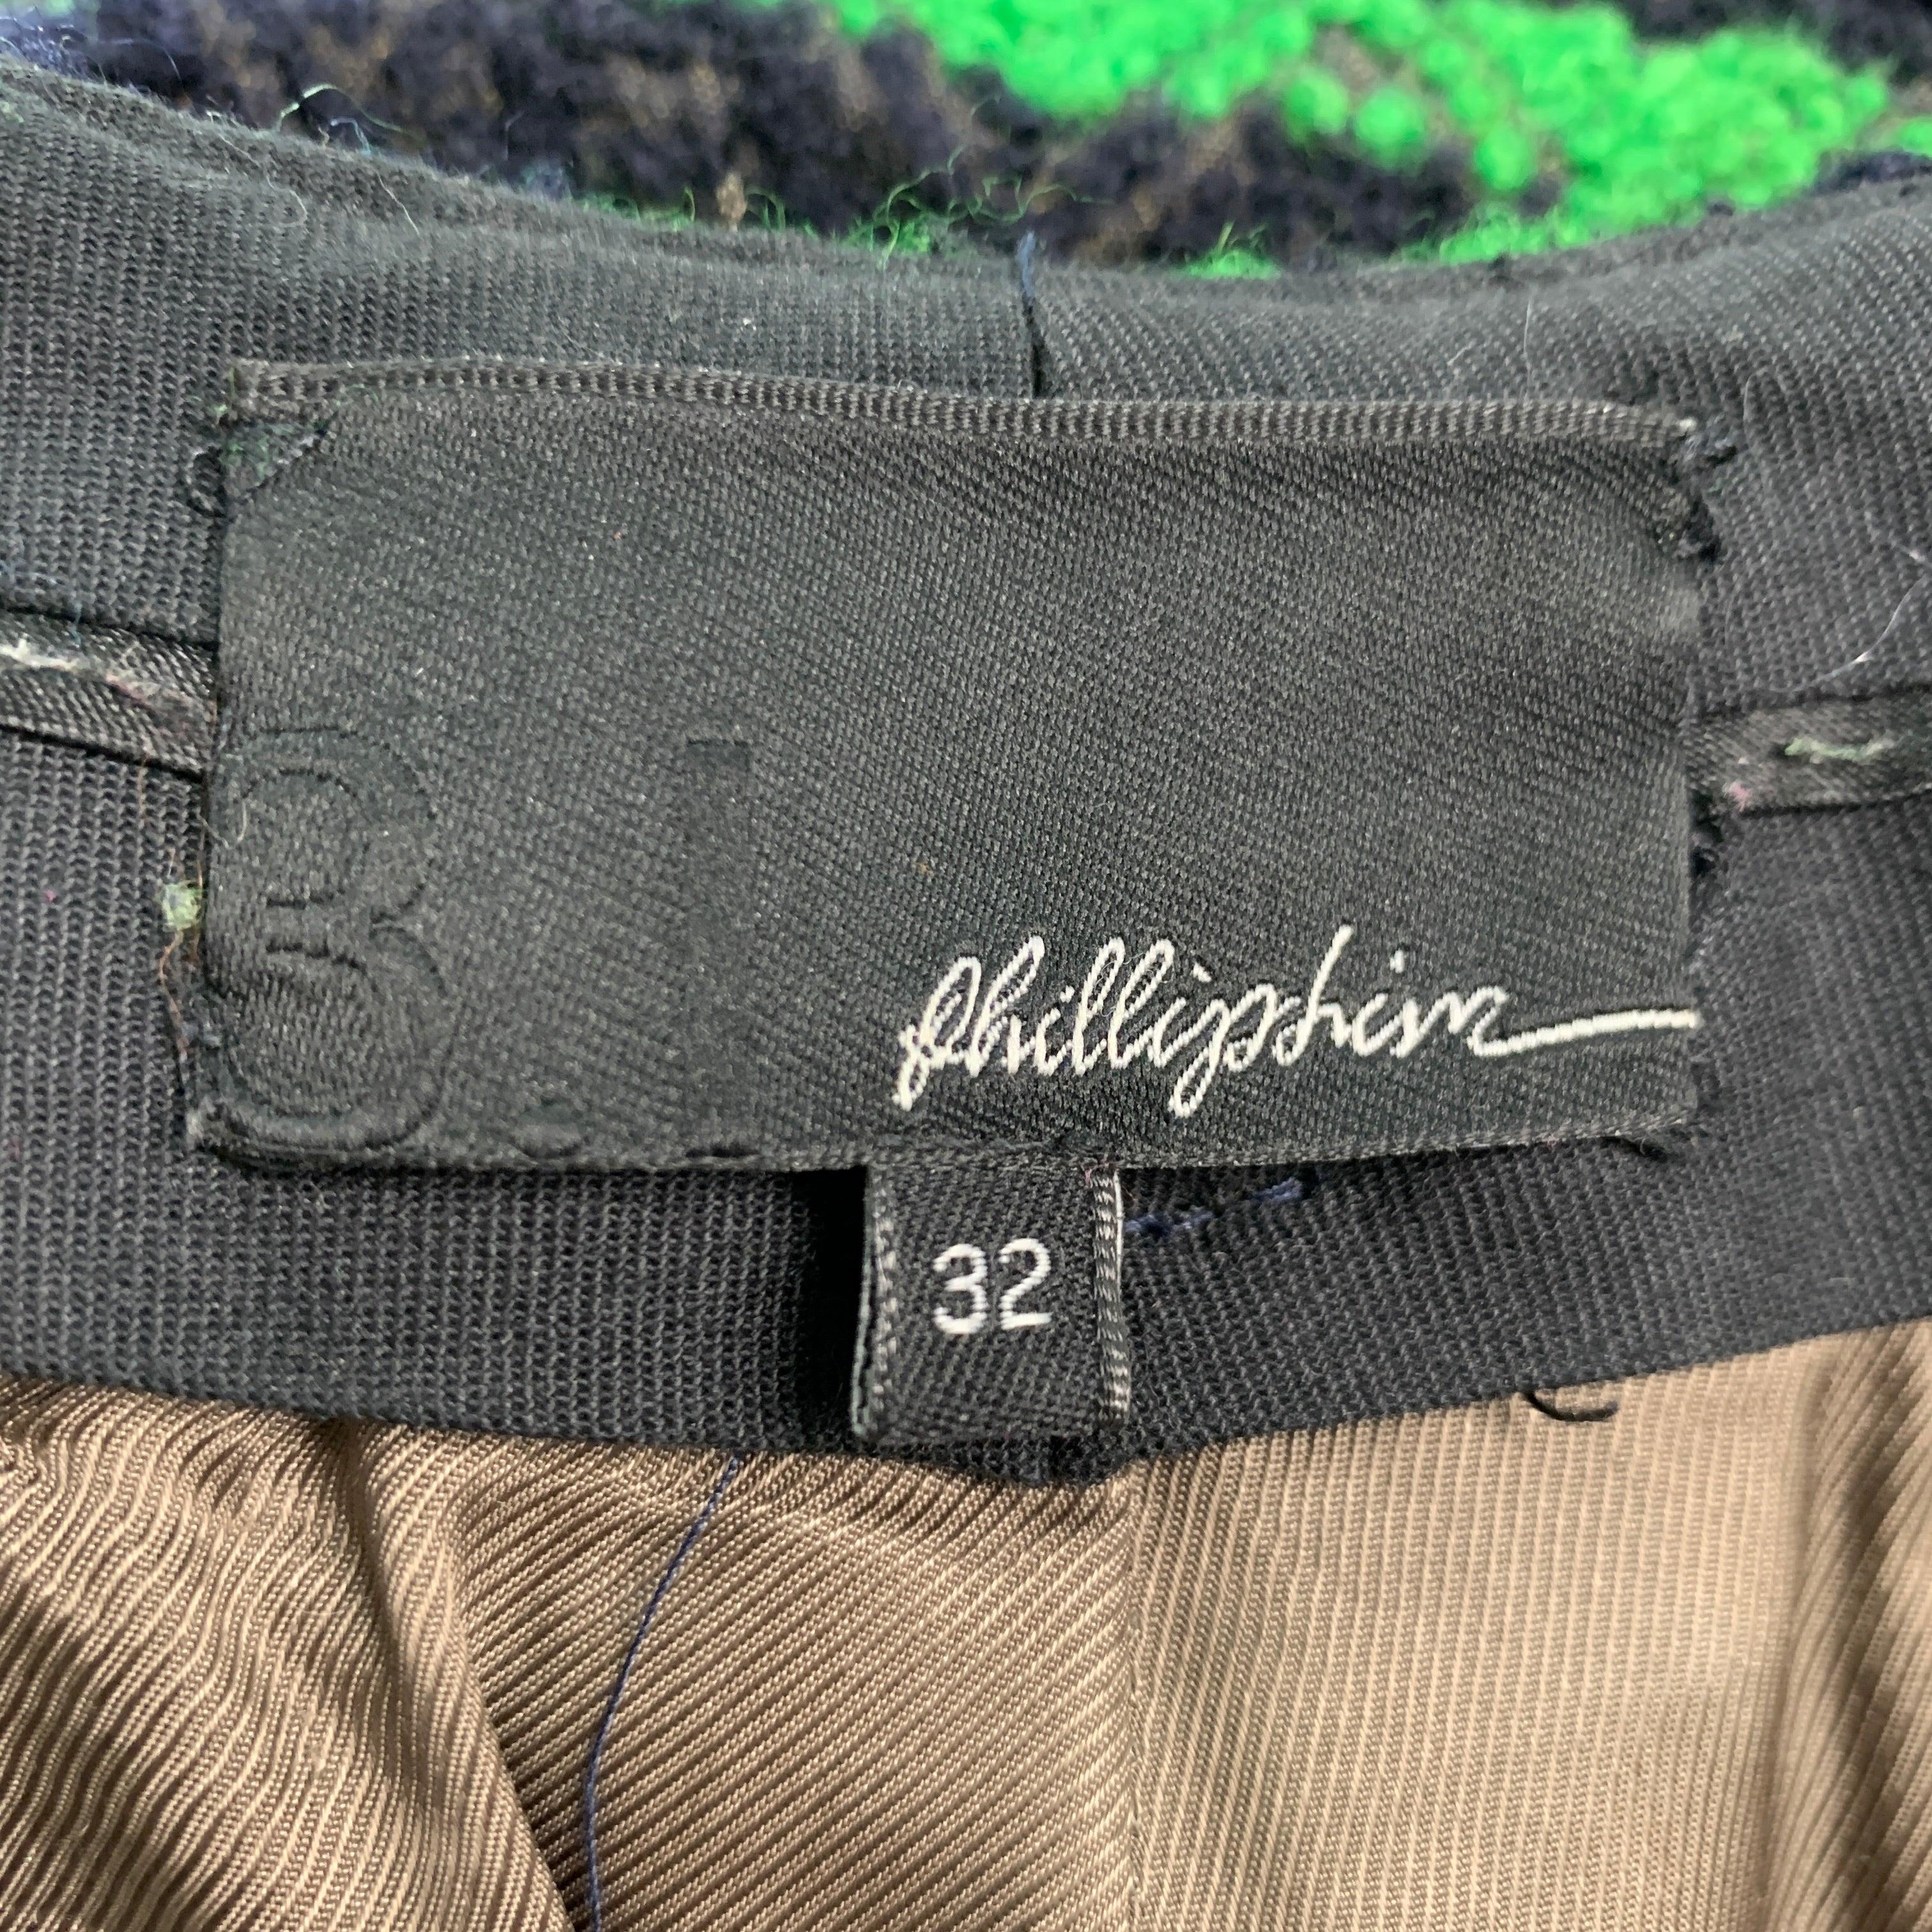 3.1 PHILLIP LIM Size 32 Green Black Tweed Cotton Wool Zip Fly Dress Pants For Sale 1